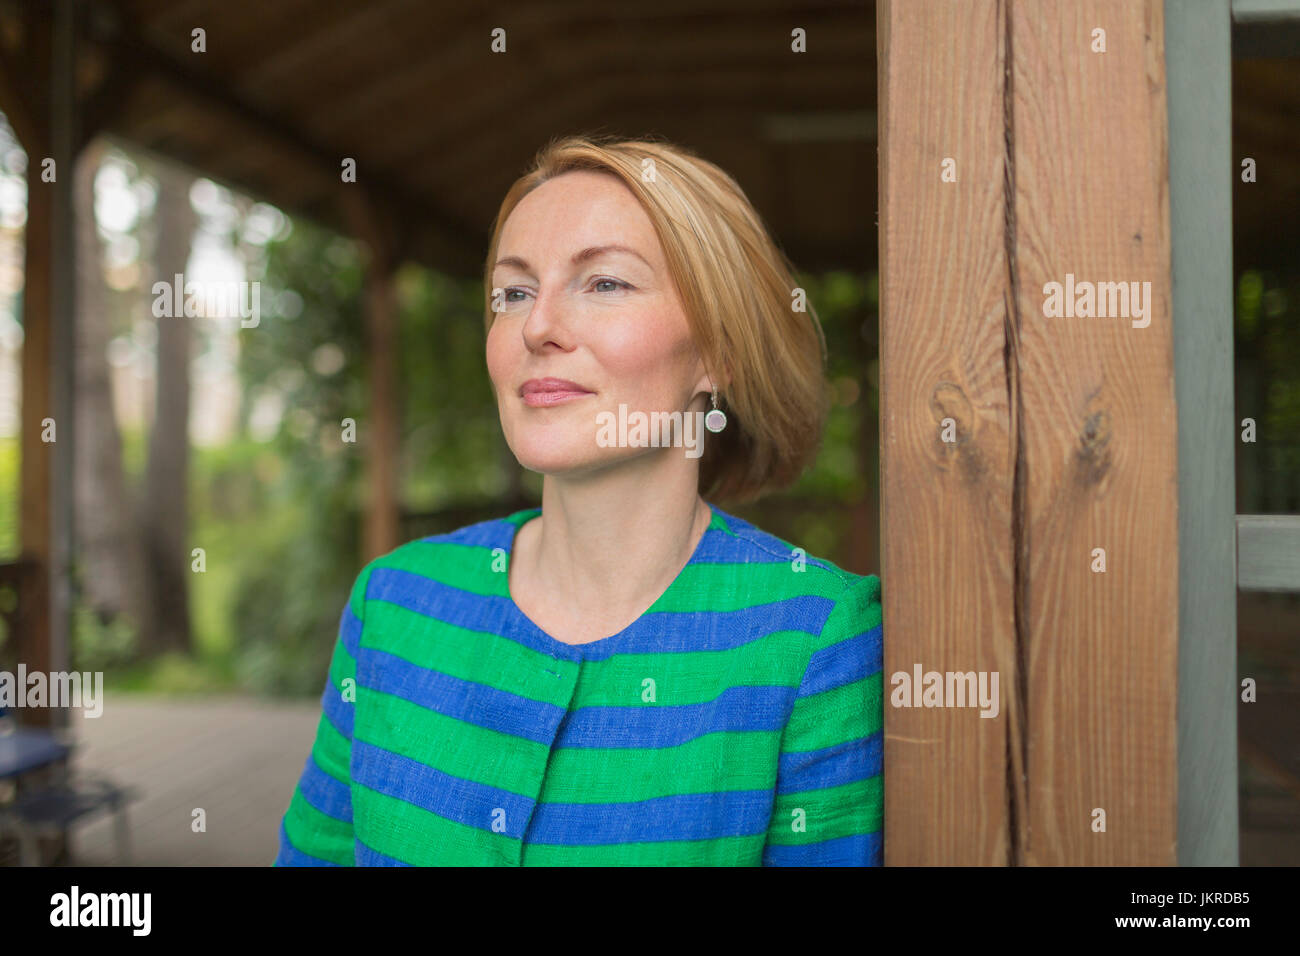 Thoughtful woman leaning on wooden wall in gazebo at park Stock Photo